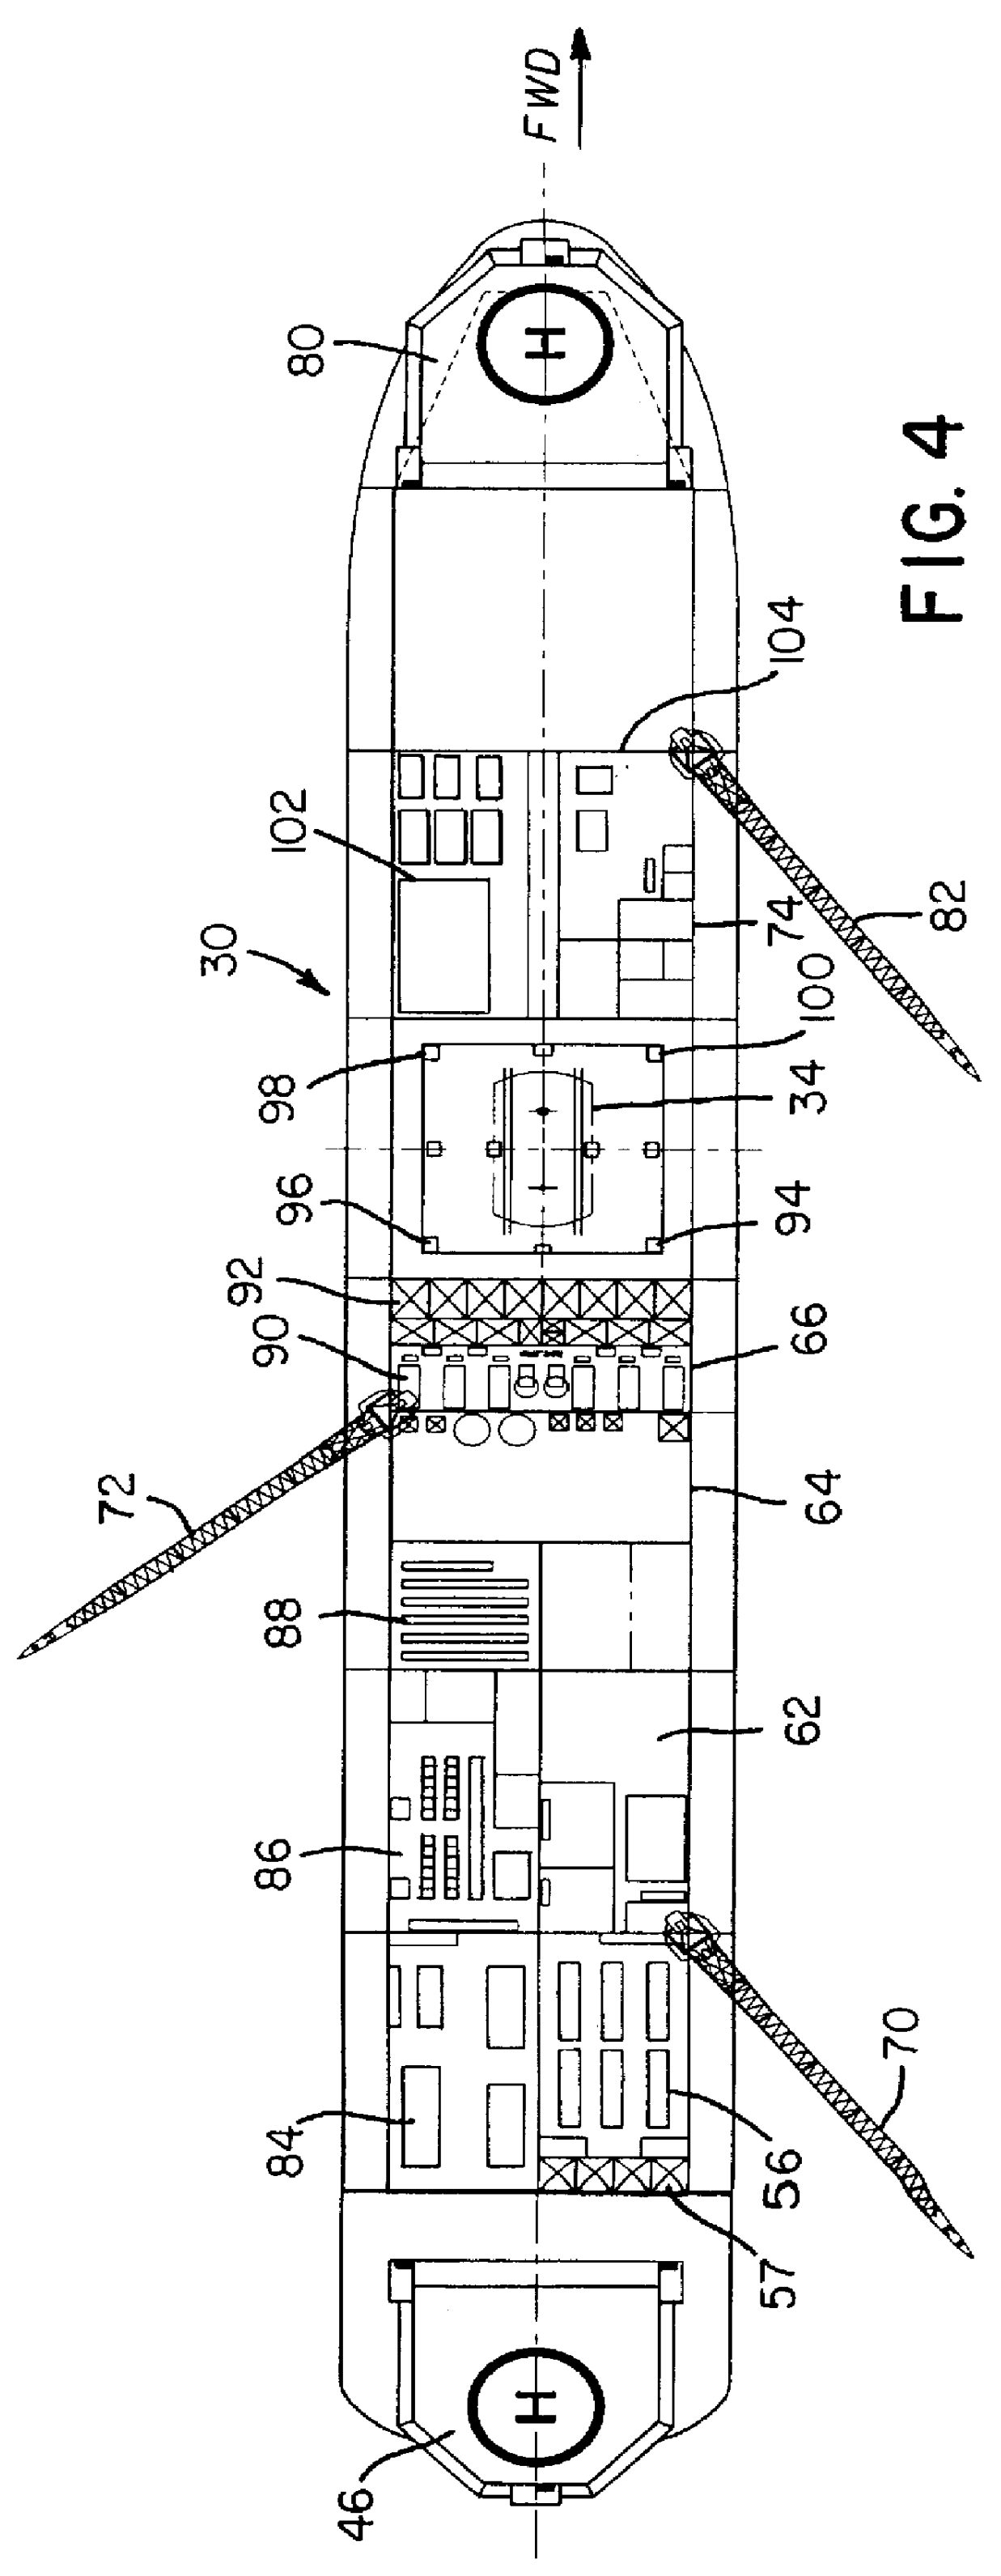 Multi-activity offshore exploration and/or development drilling method and apparatus